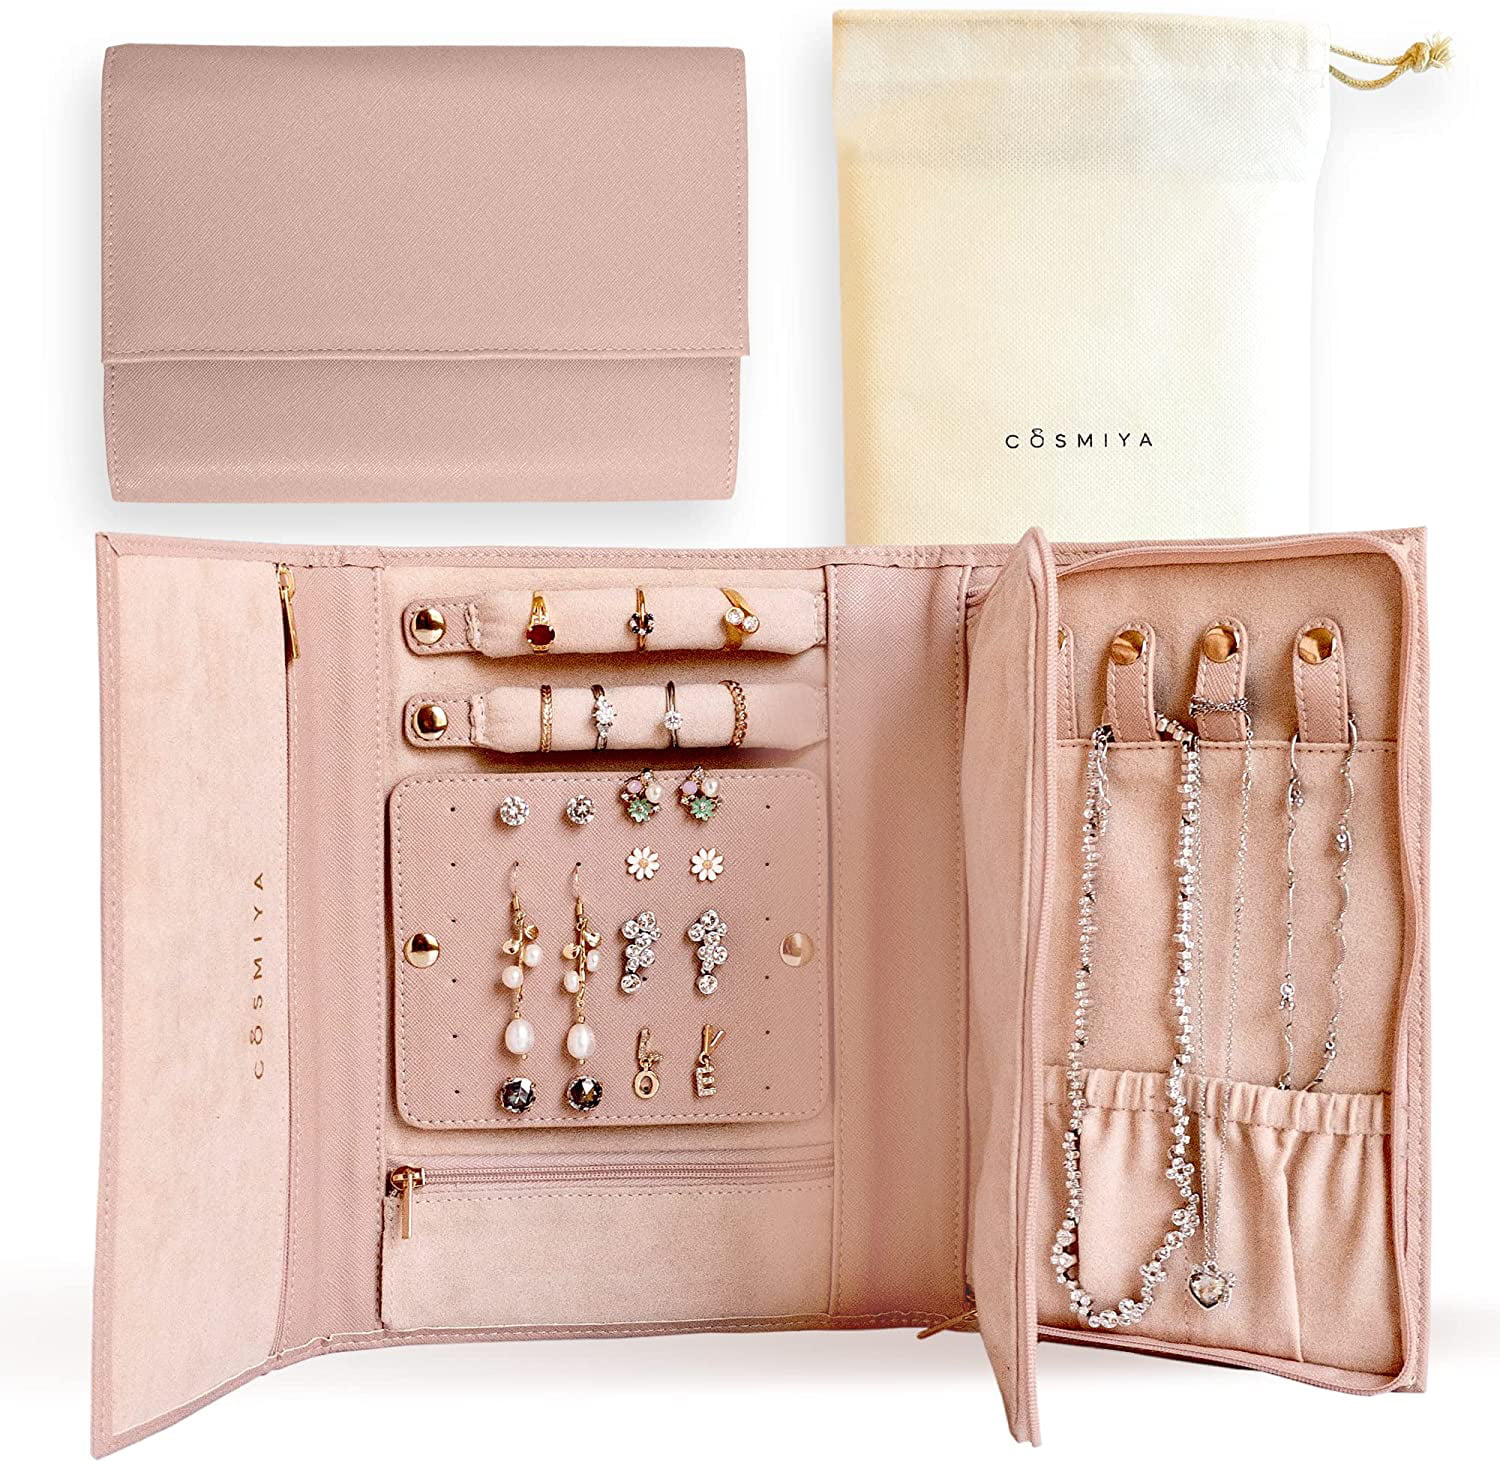 SIDAITE Travel Jewelry Organizer Jewelry Roll Foldable Storage Case for Women Earring Pink, Bag only Ring Necklace and Braclet Holders 